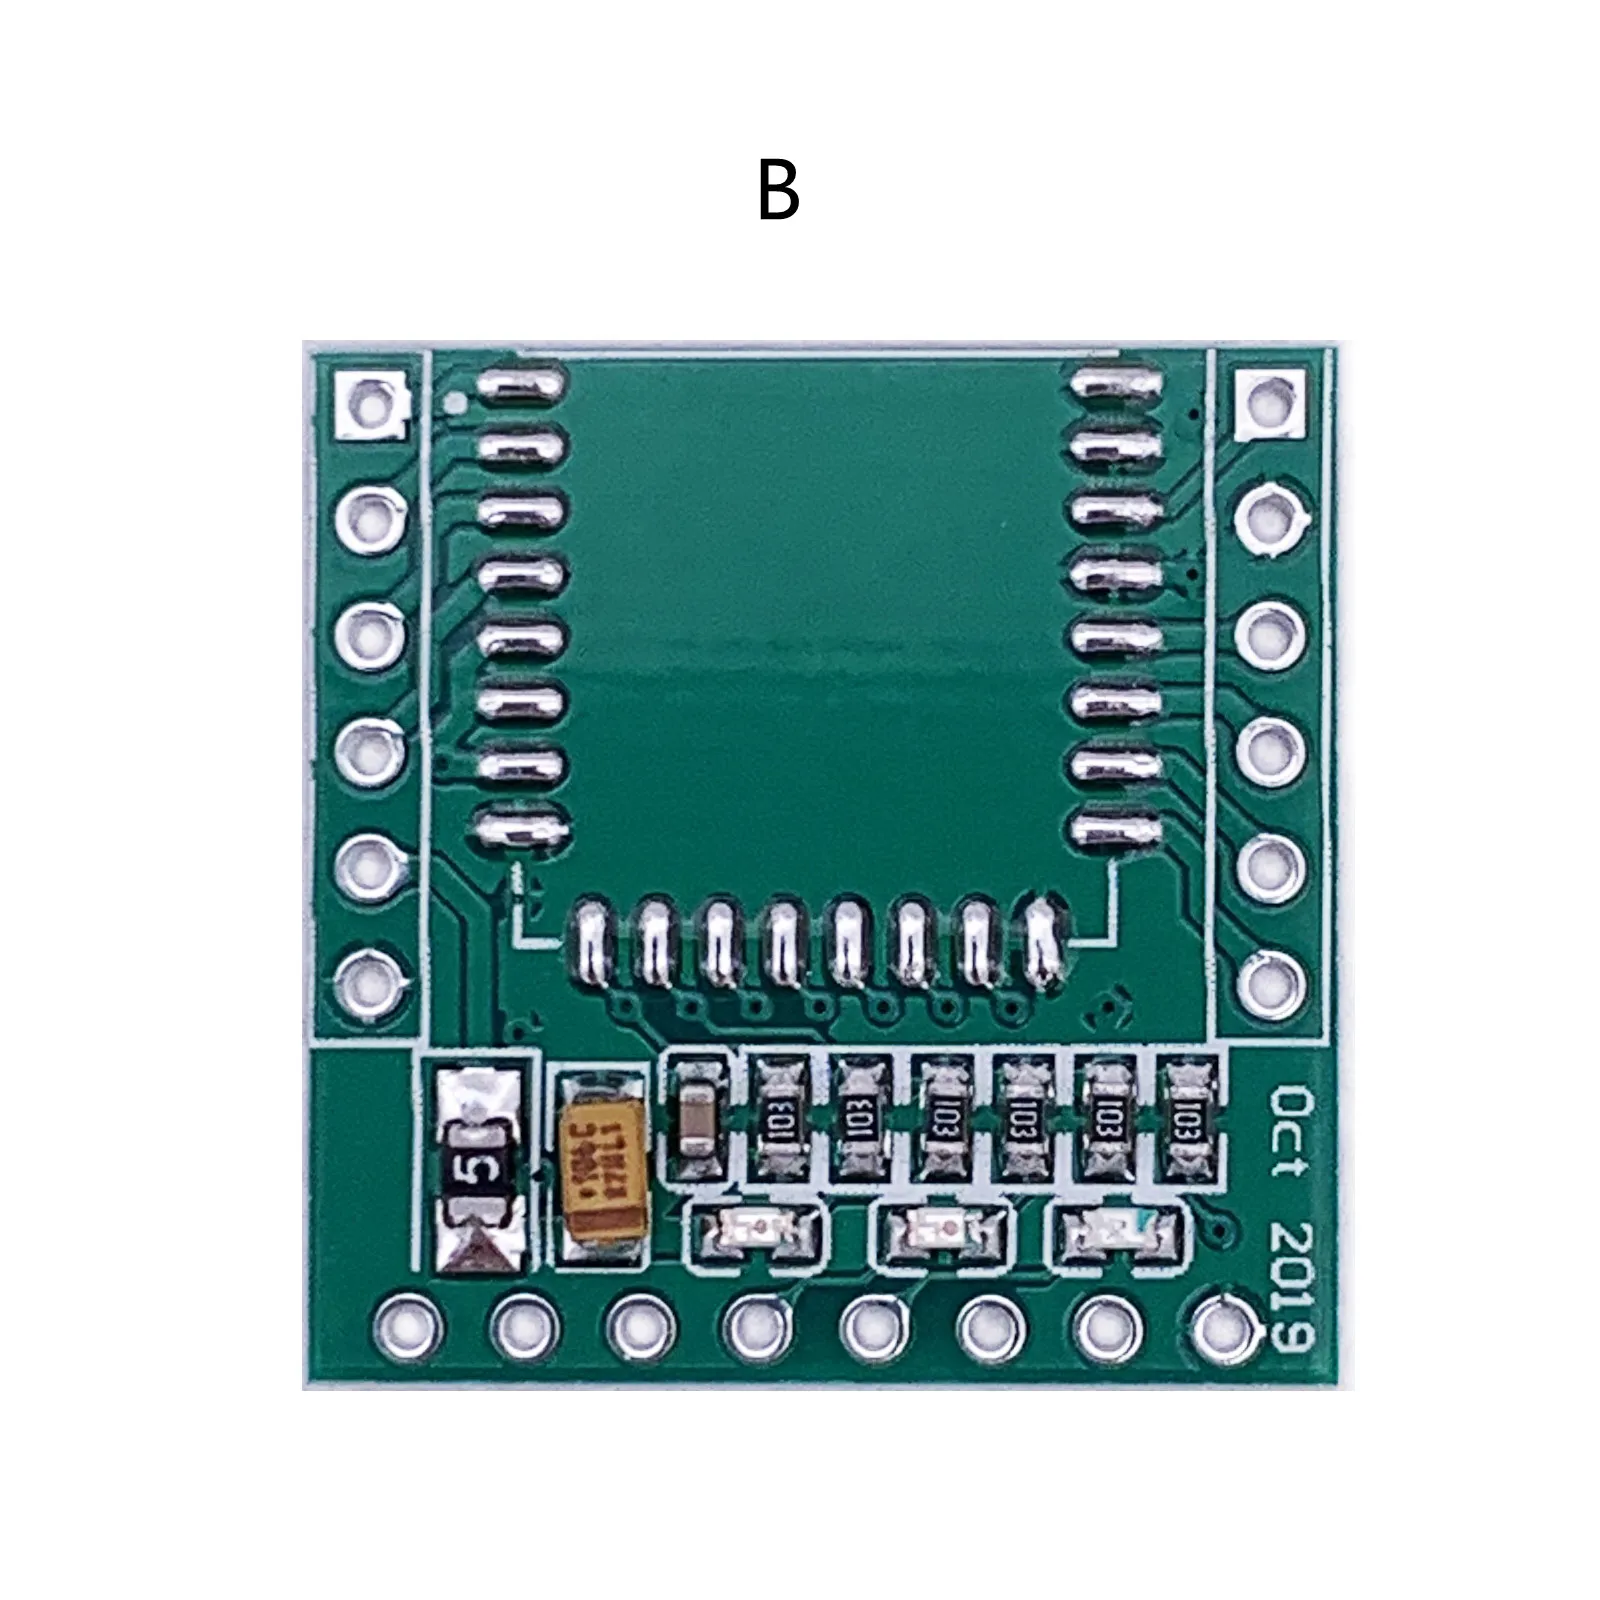 DWM1000 UWB Positioning Adapter Board, Pure Circuit Board Without Welding, Send Circuit PCB